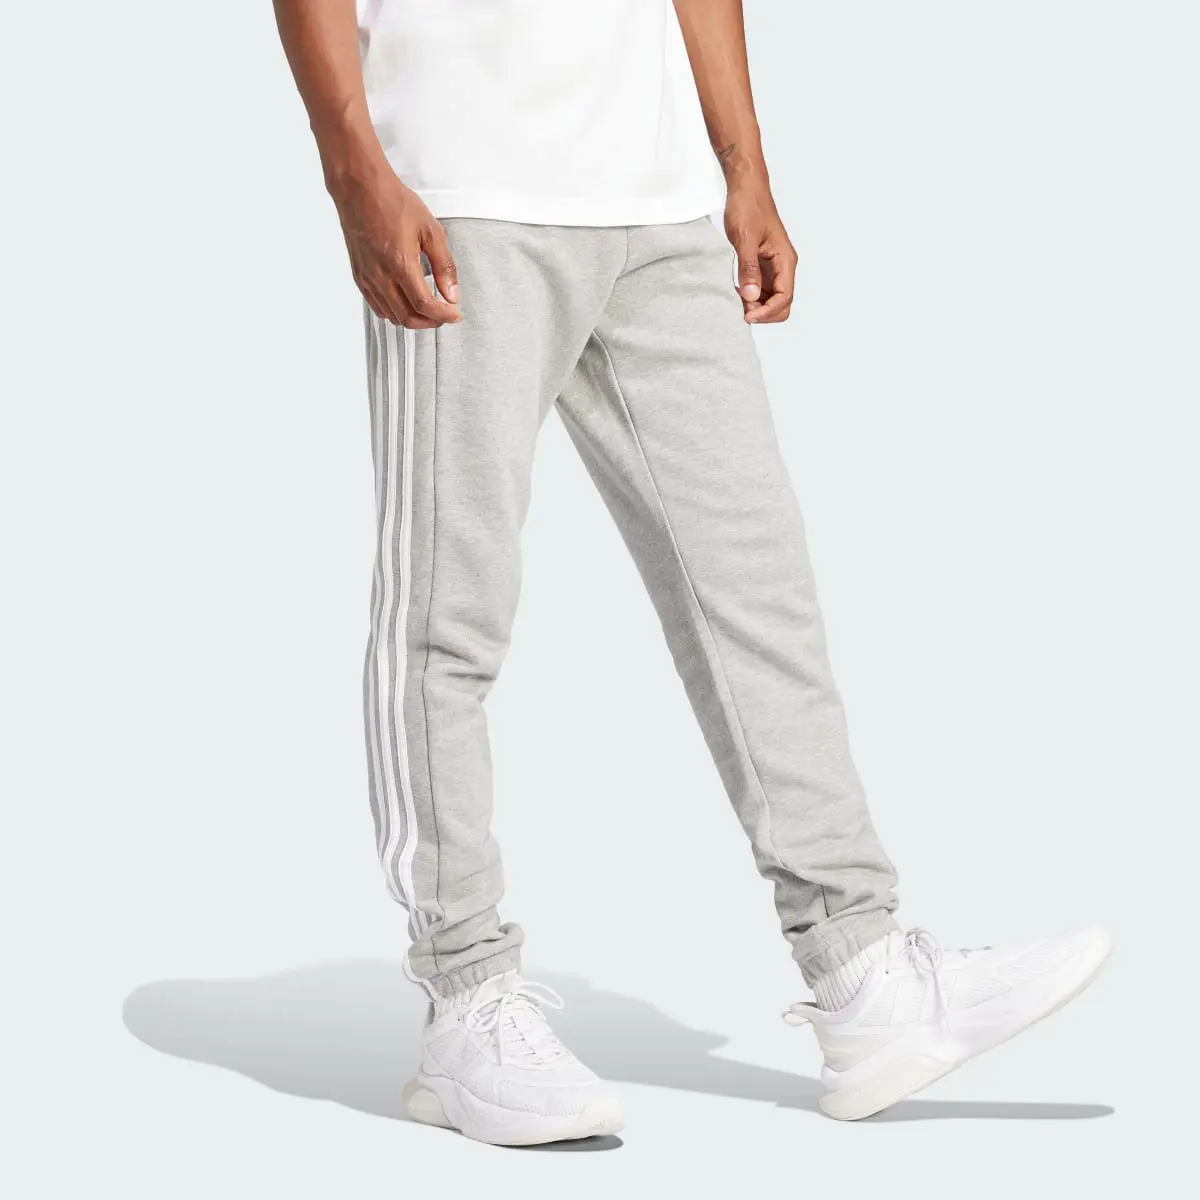 Adidas Essentials French Terry Tapered Elastic Cuff 3-Stripes Pants. 2